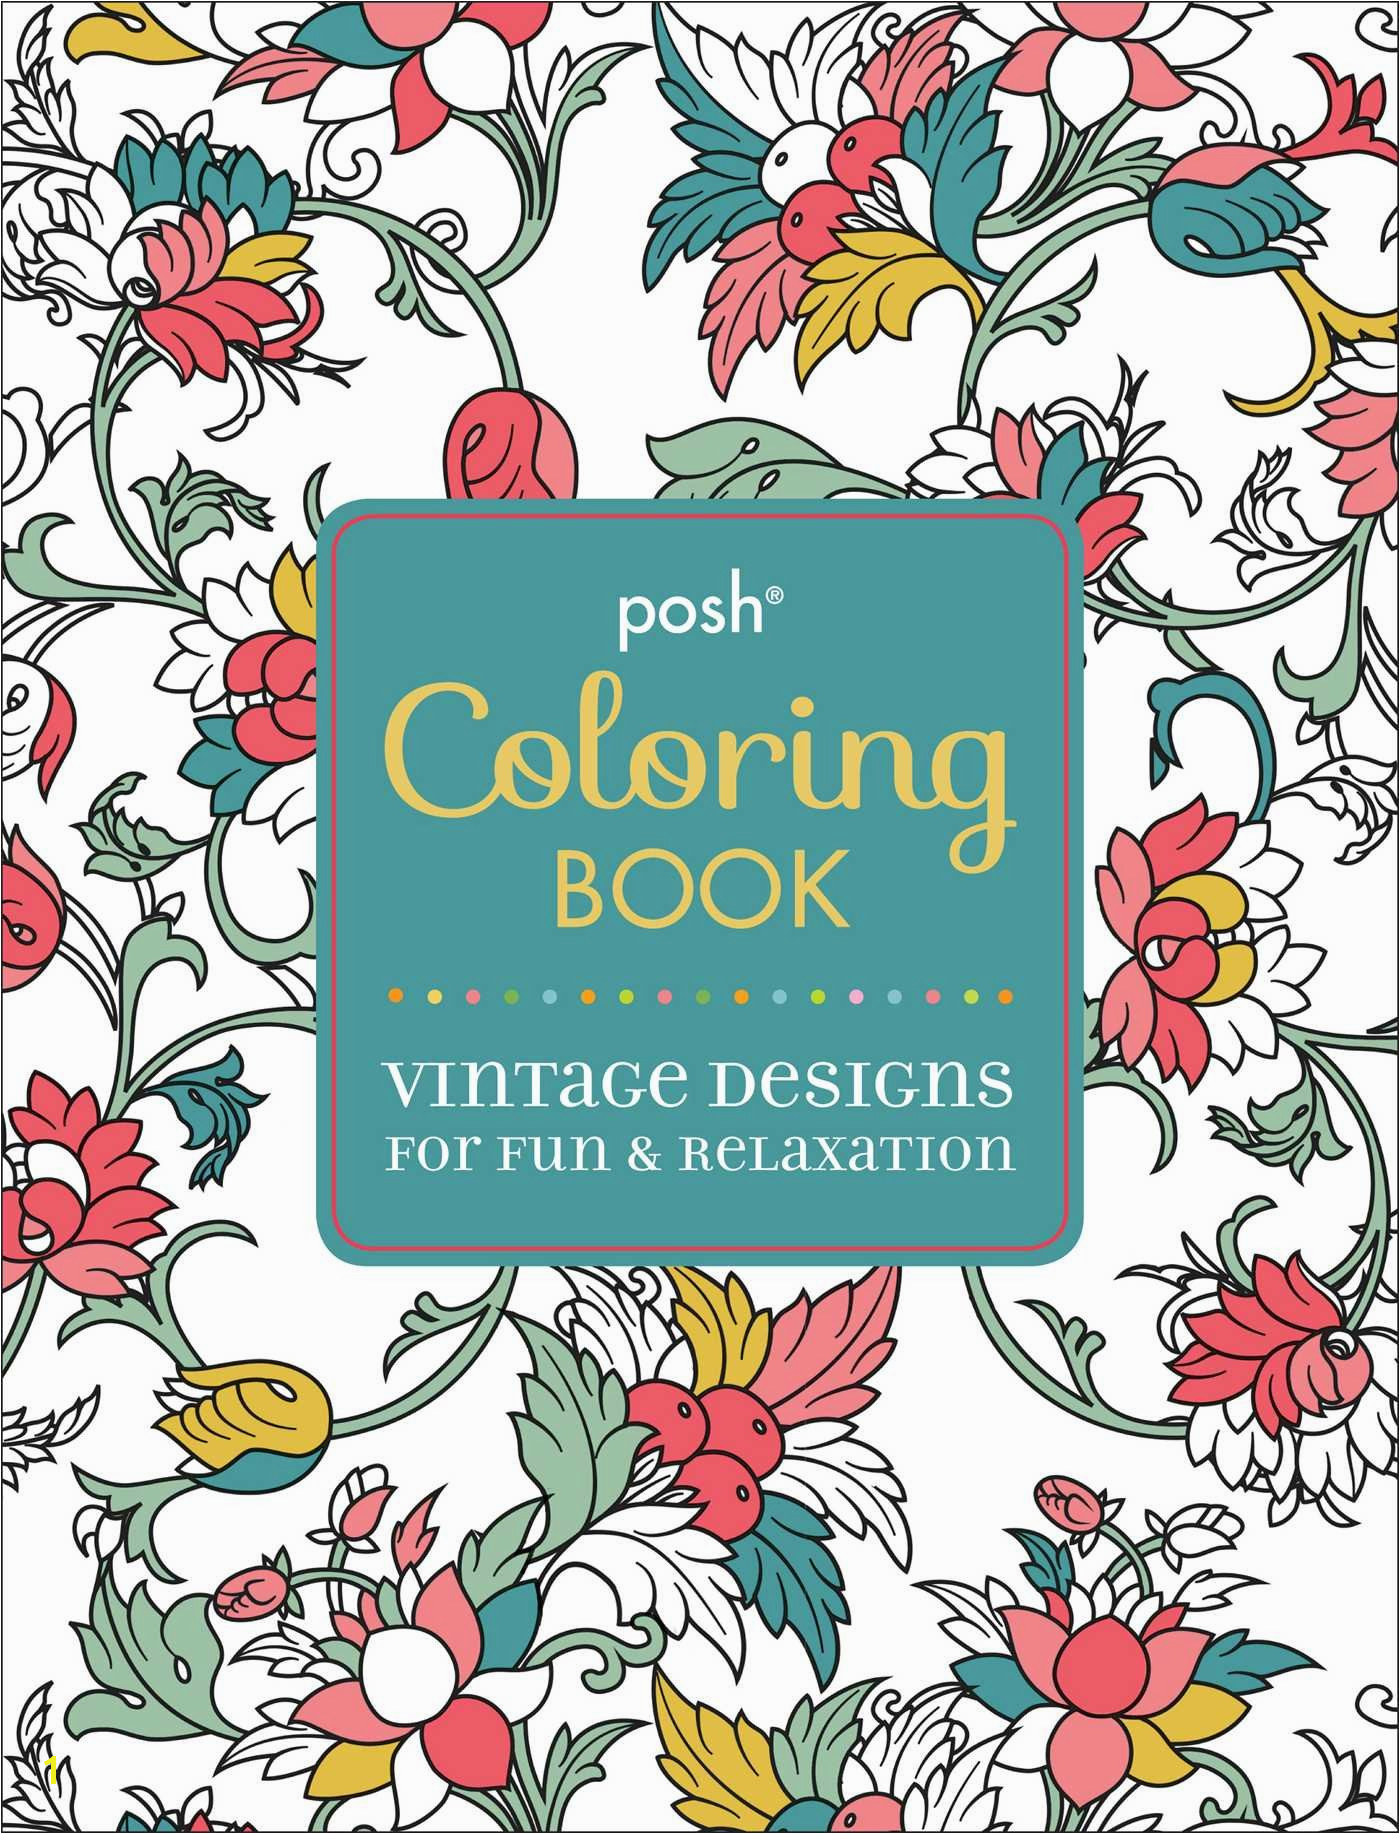 Amazon Posh Adult Coloring Book Vintage Designs for Fun & Relaxation Posh Coloring Books Andrews McMeel Publishing Books